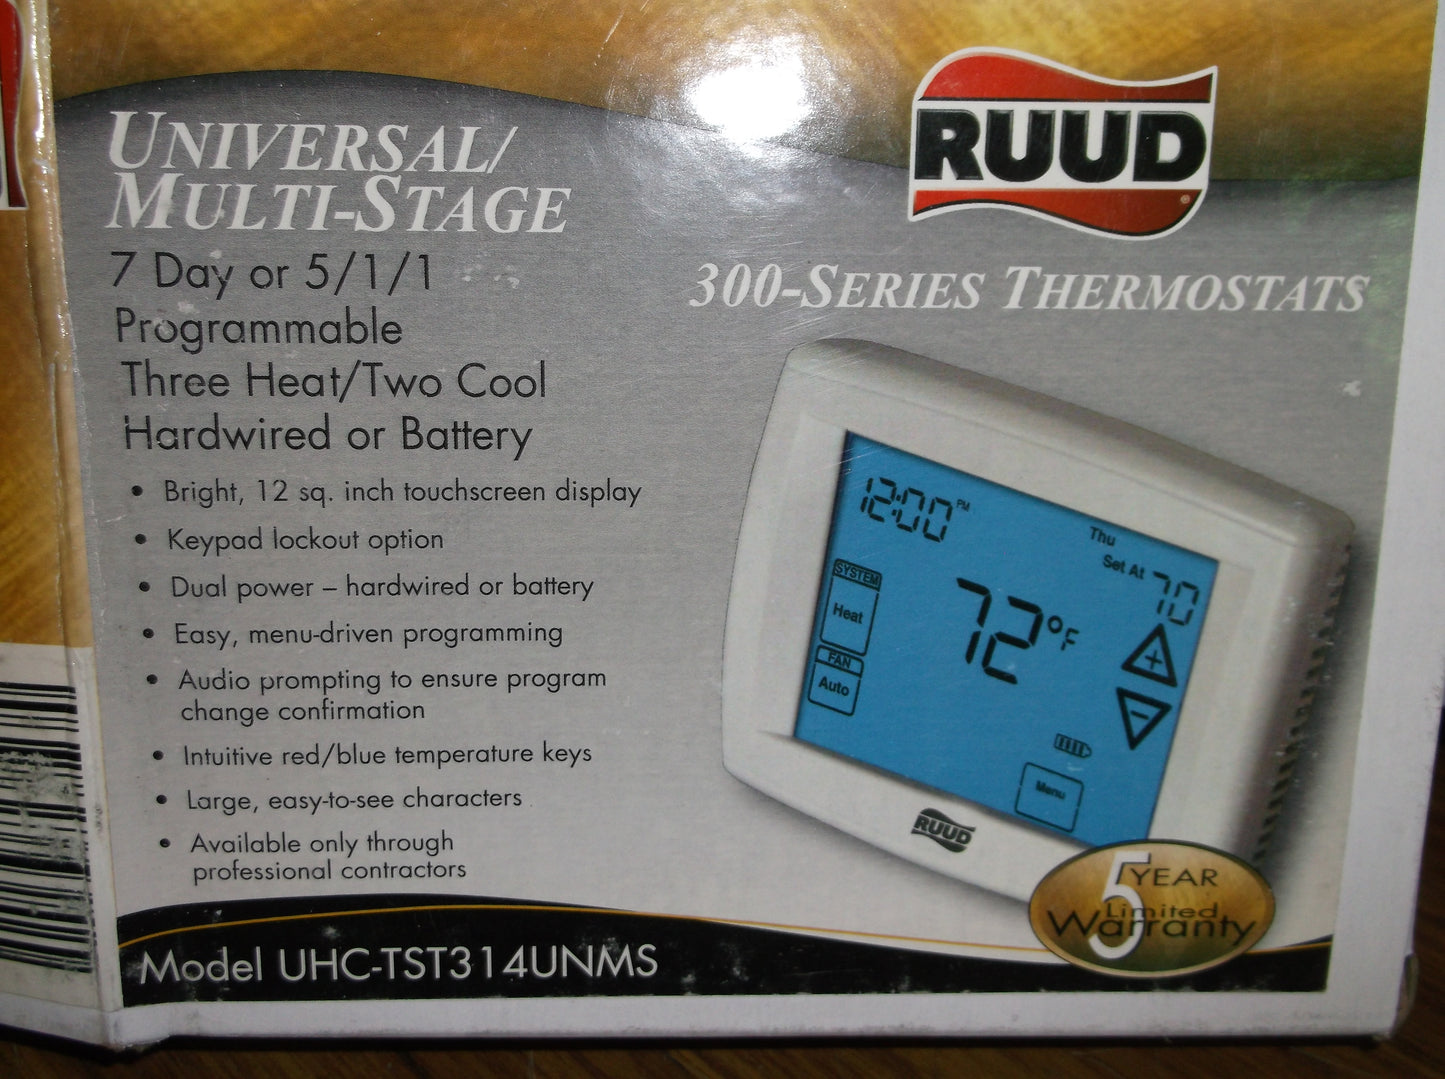 UNIVERSAL/MULTI-STAGE 300-SERIES DELUXE TOUCHSCREEN THERMOSTAT 7 DAT OR 5/1/1 PROGRAMMABLE 3-HEAT/2-COOL HARDWIRED OR BATTERY